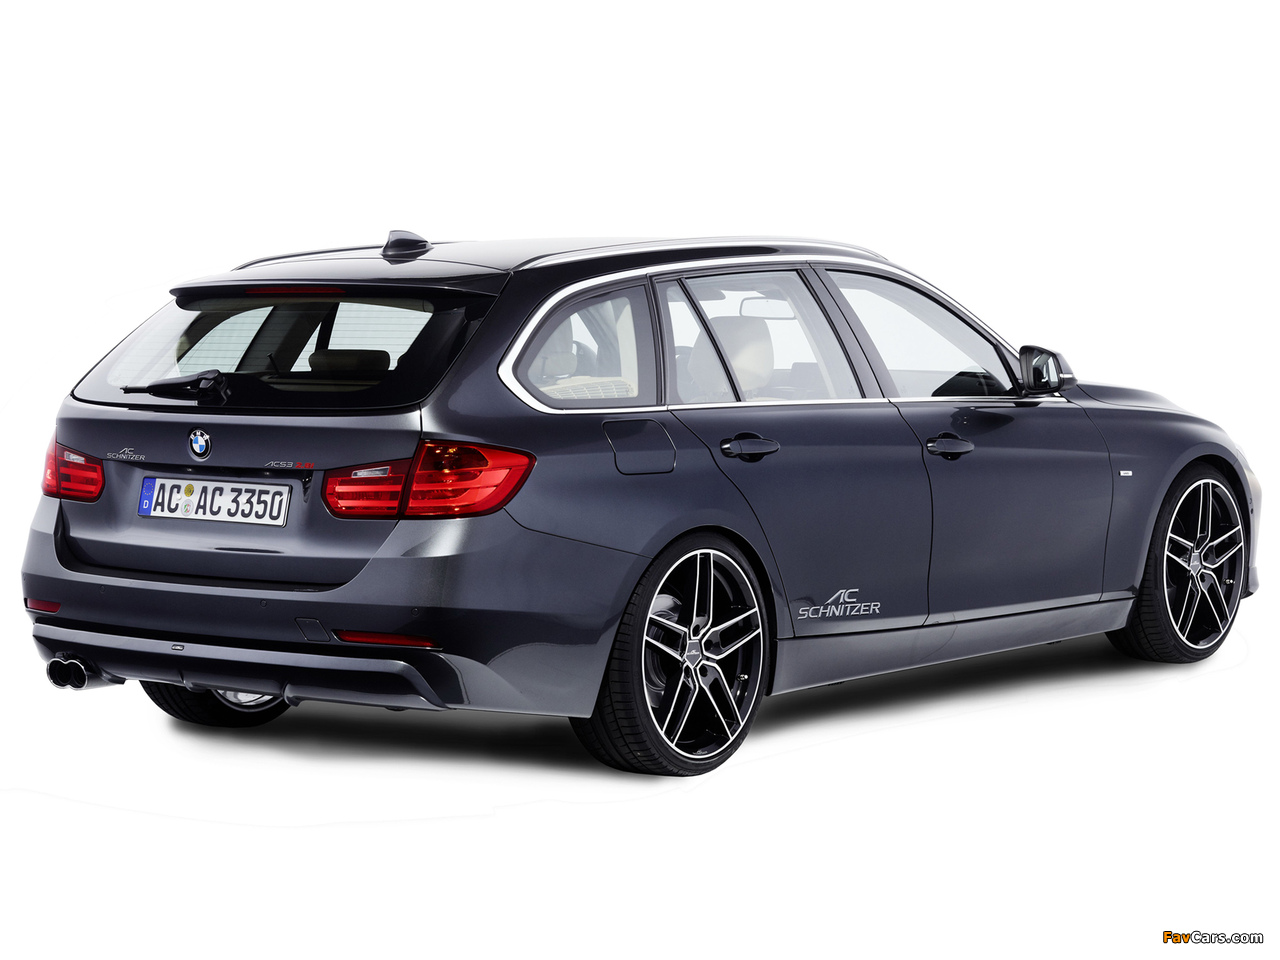 AC Schnitzer ACS3 2.8i Touring (F31) 2012 pictures (1280 x 960)